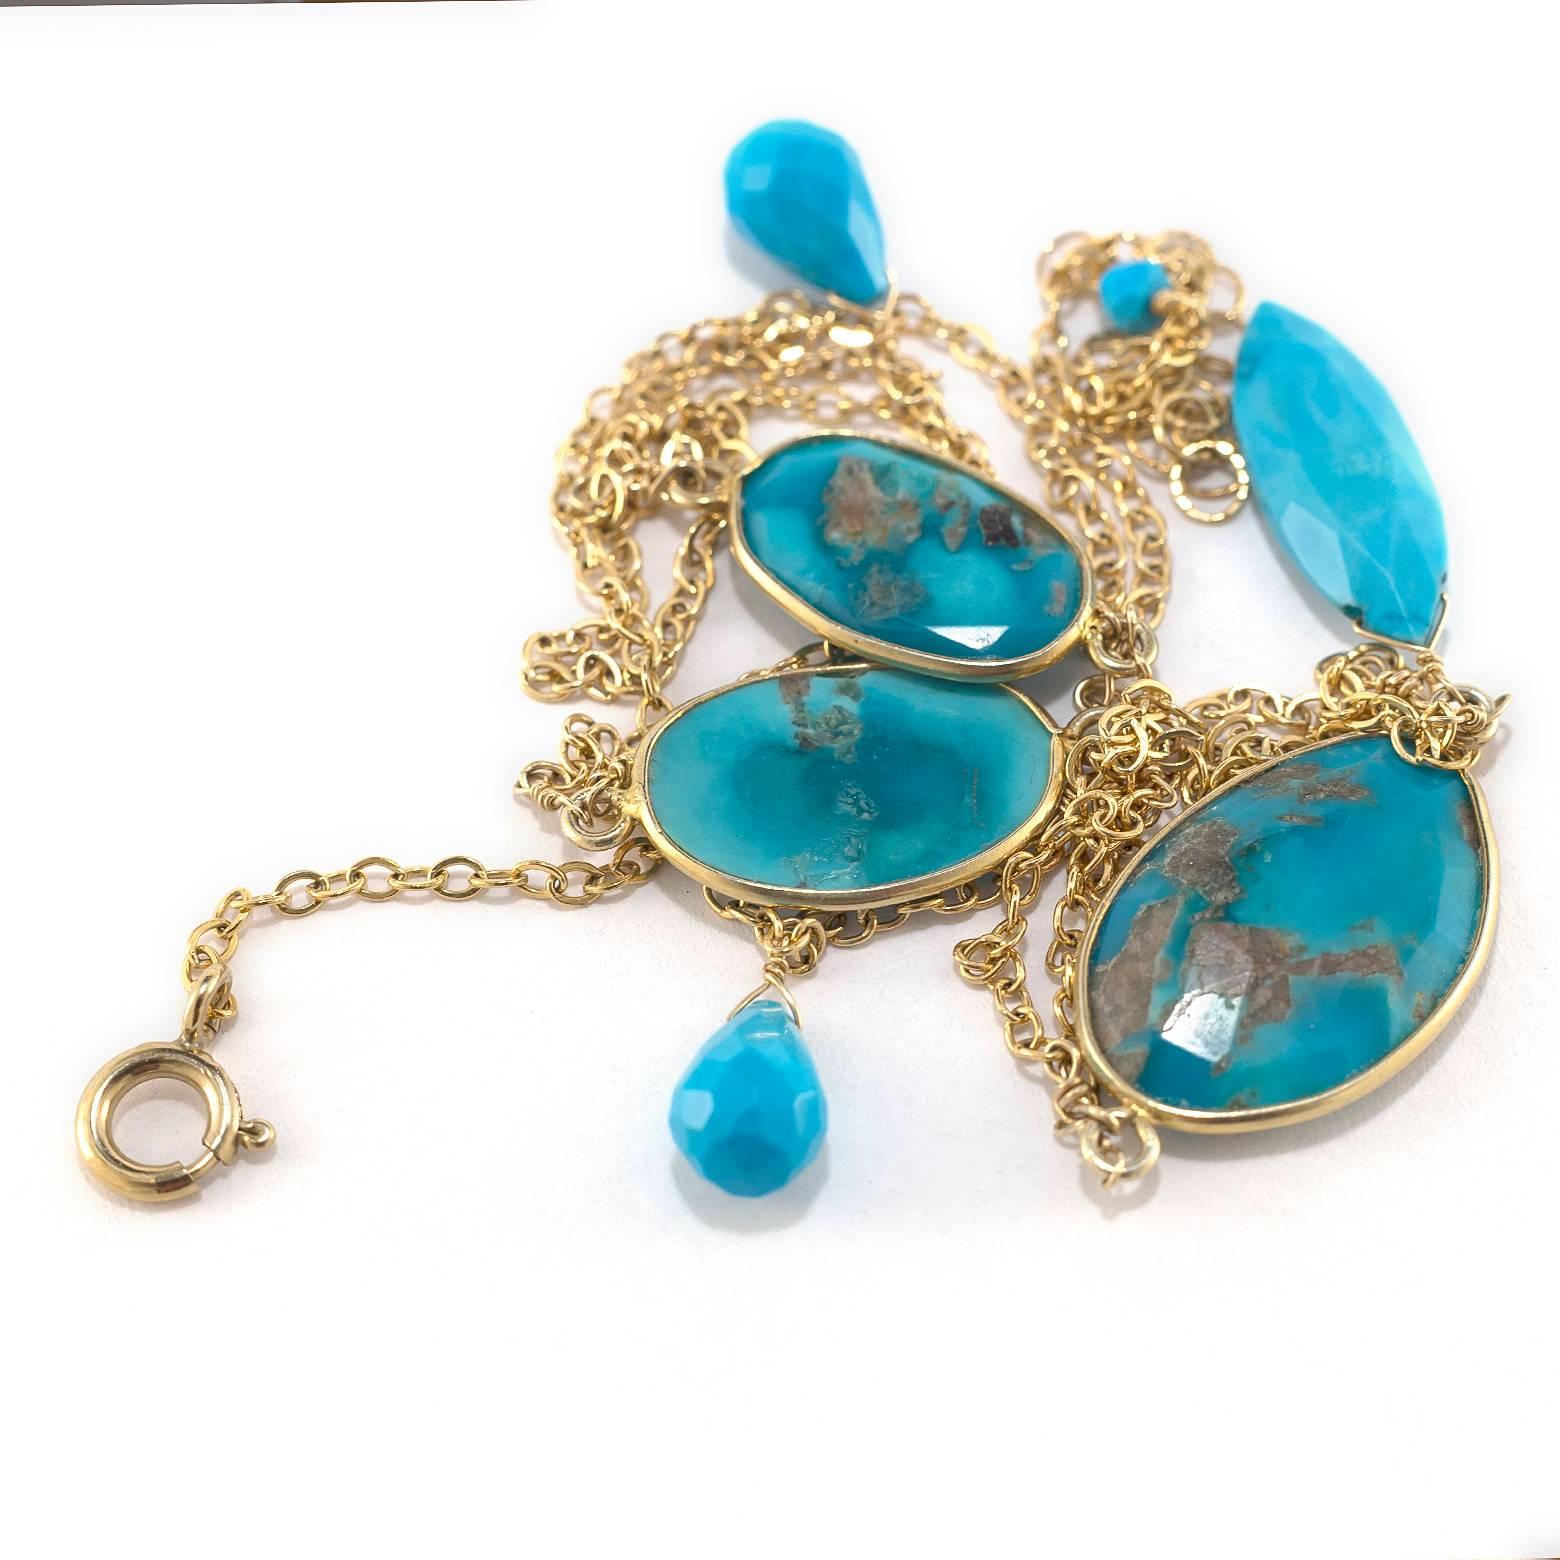 This is a delicate 'Sleeping Beauty' Turquoise necklace. The cascades of chain attach effortlessly to the gold rimmed turquoise.The drops finish it off to create a stunning piece of art that explodes with color!